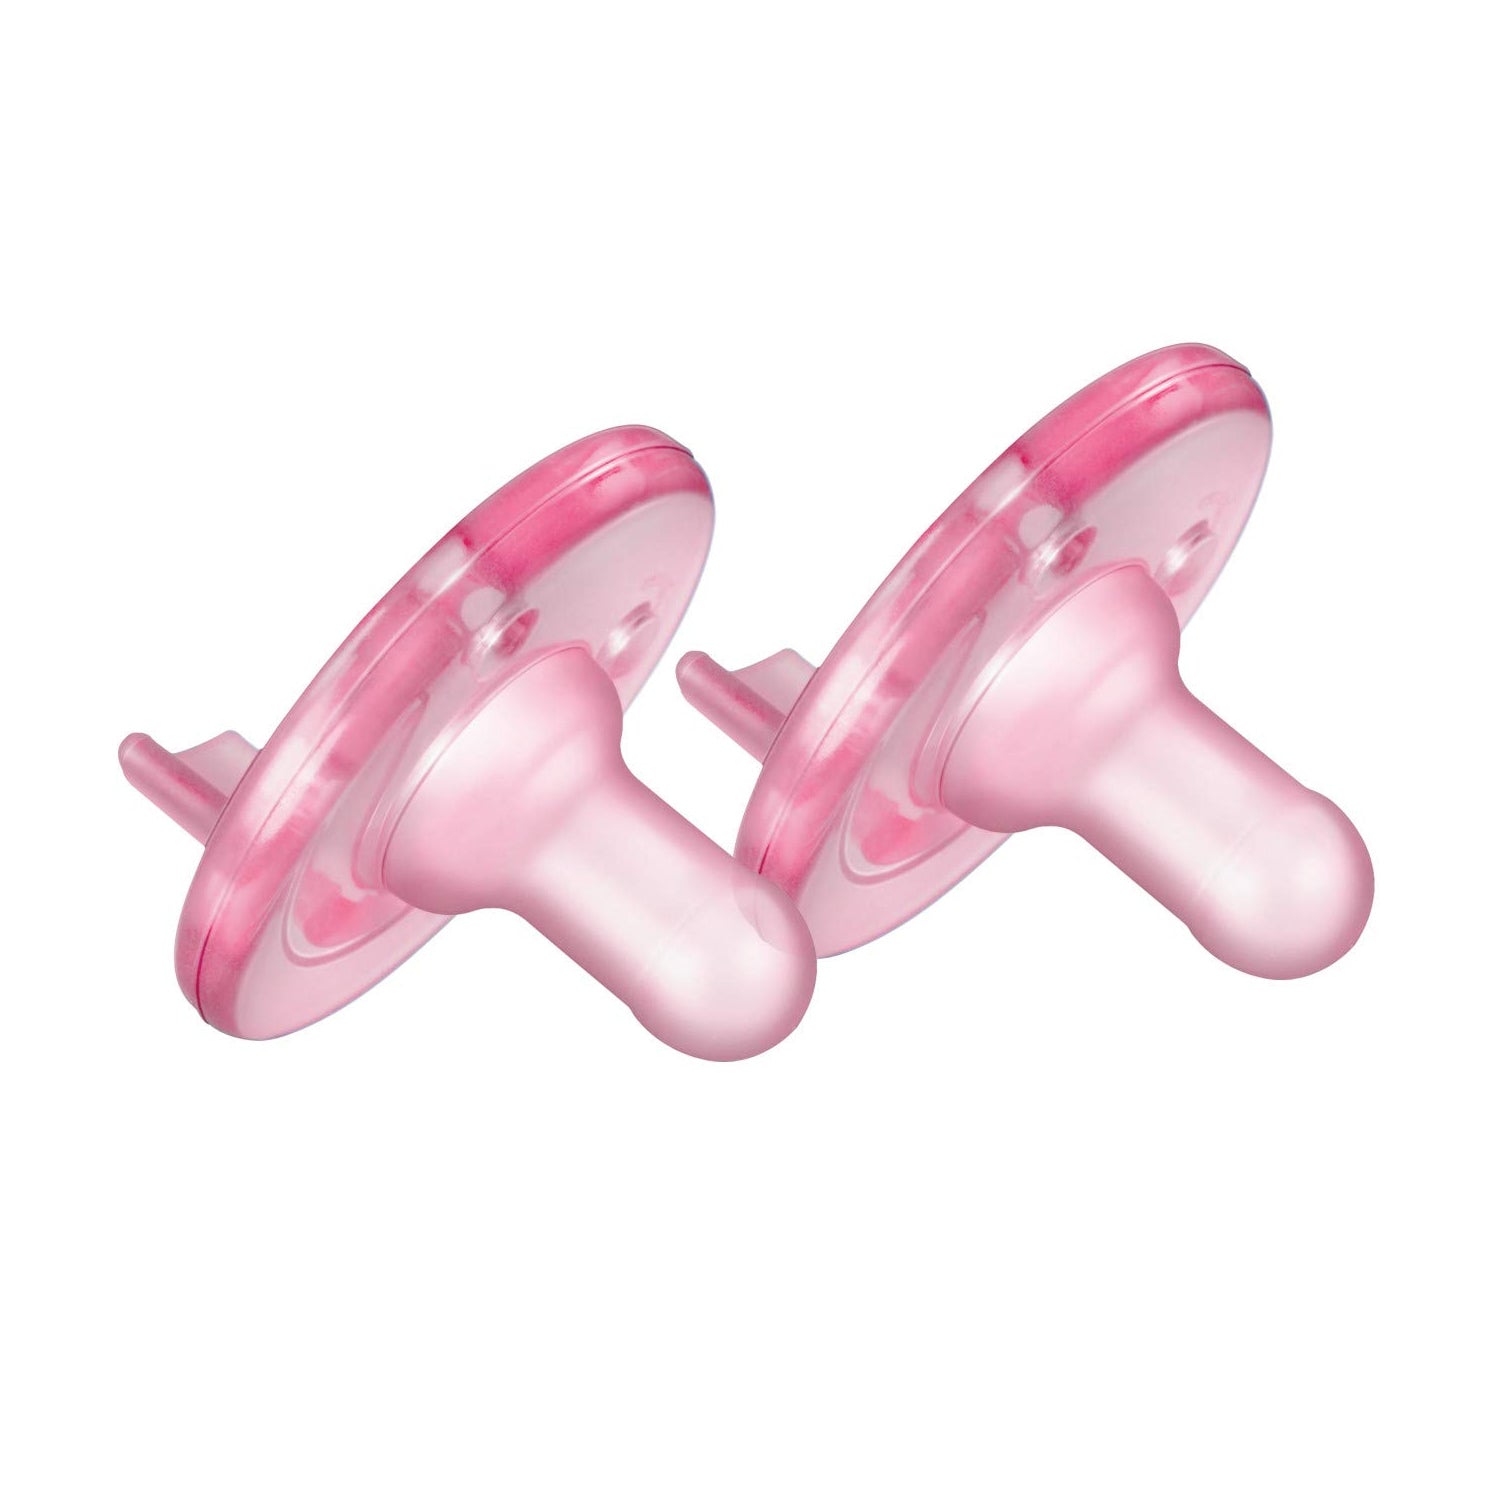 Philips Avent Pack of 2 Pink Night Pacifiers 6-18 months